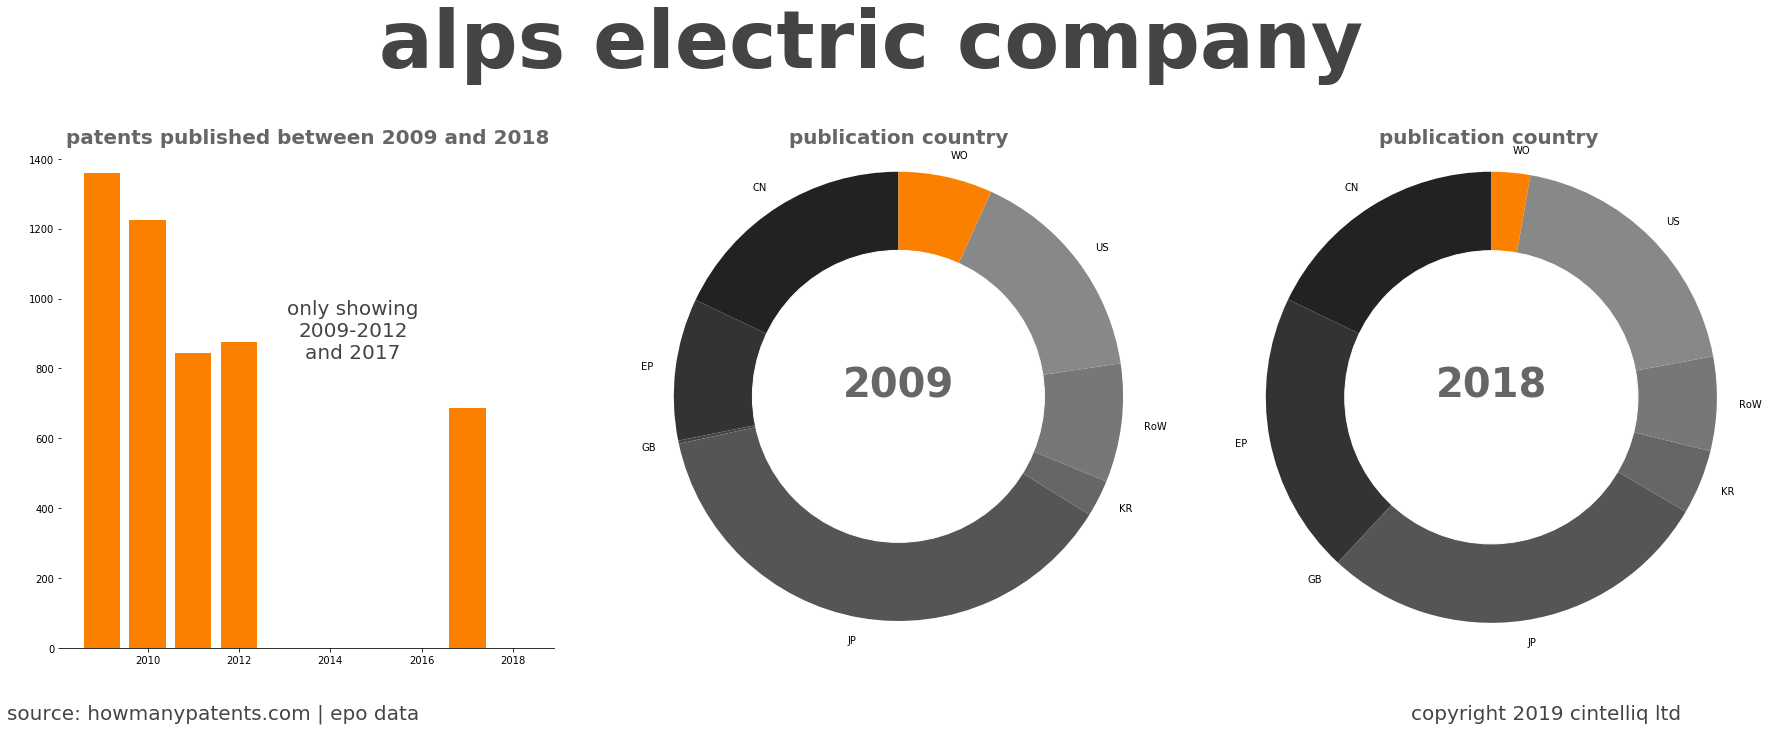 summary of patents for Alps Electric Company